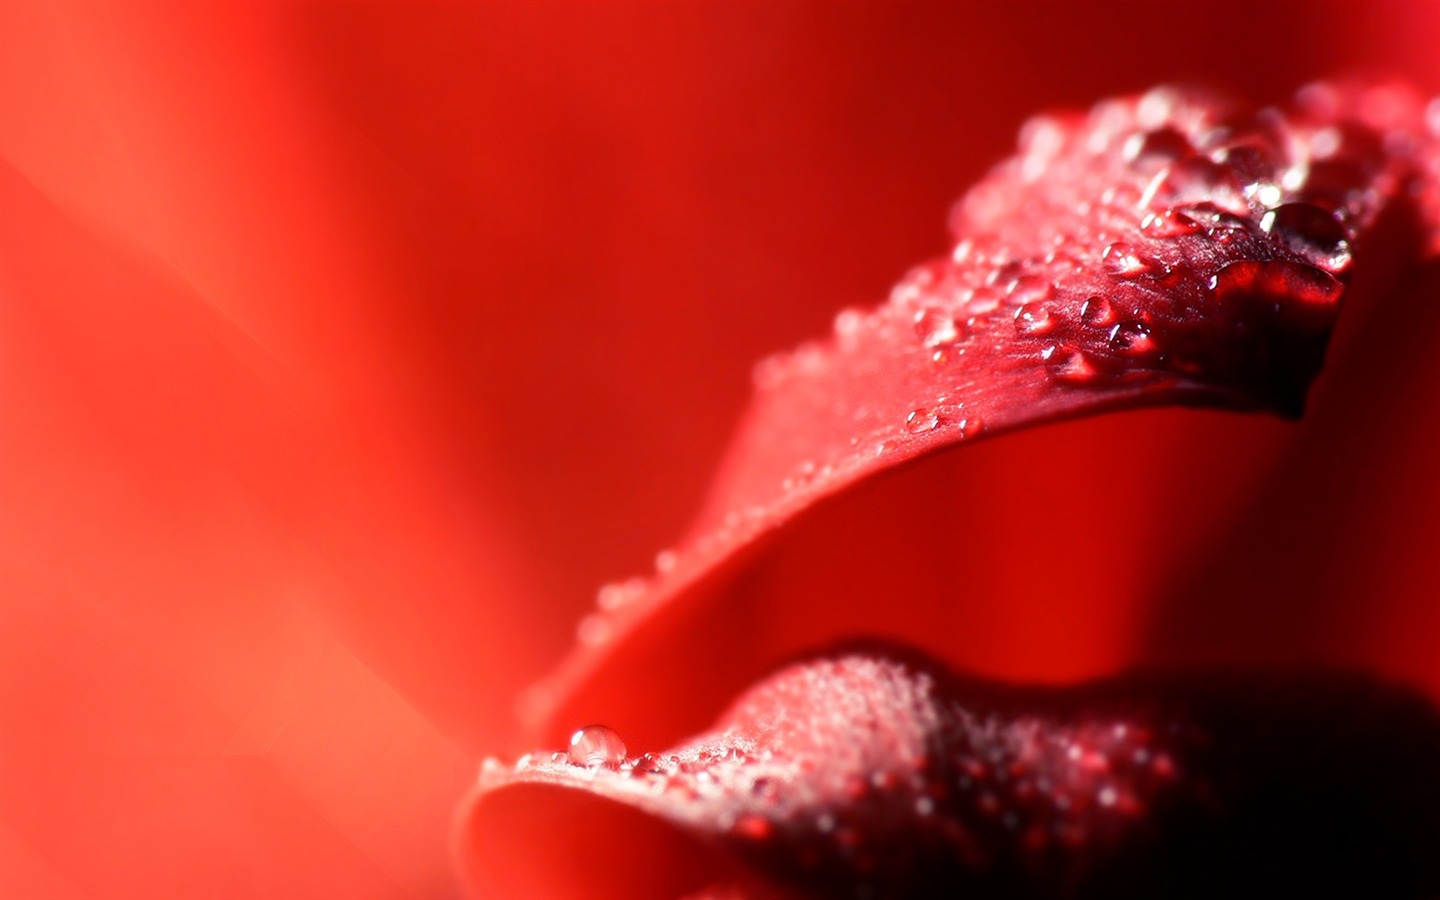 HD wallpaper flowers and drops of water #12 - 1440x900